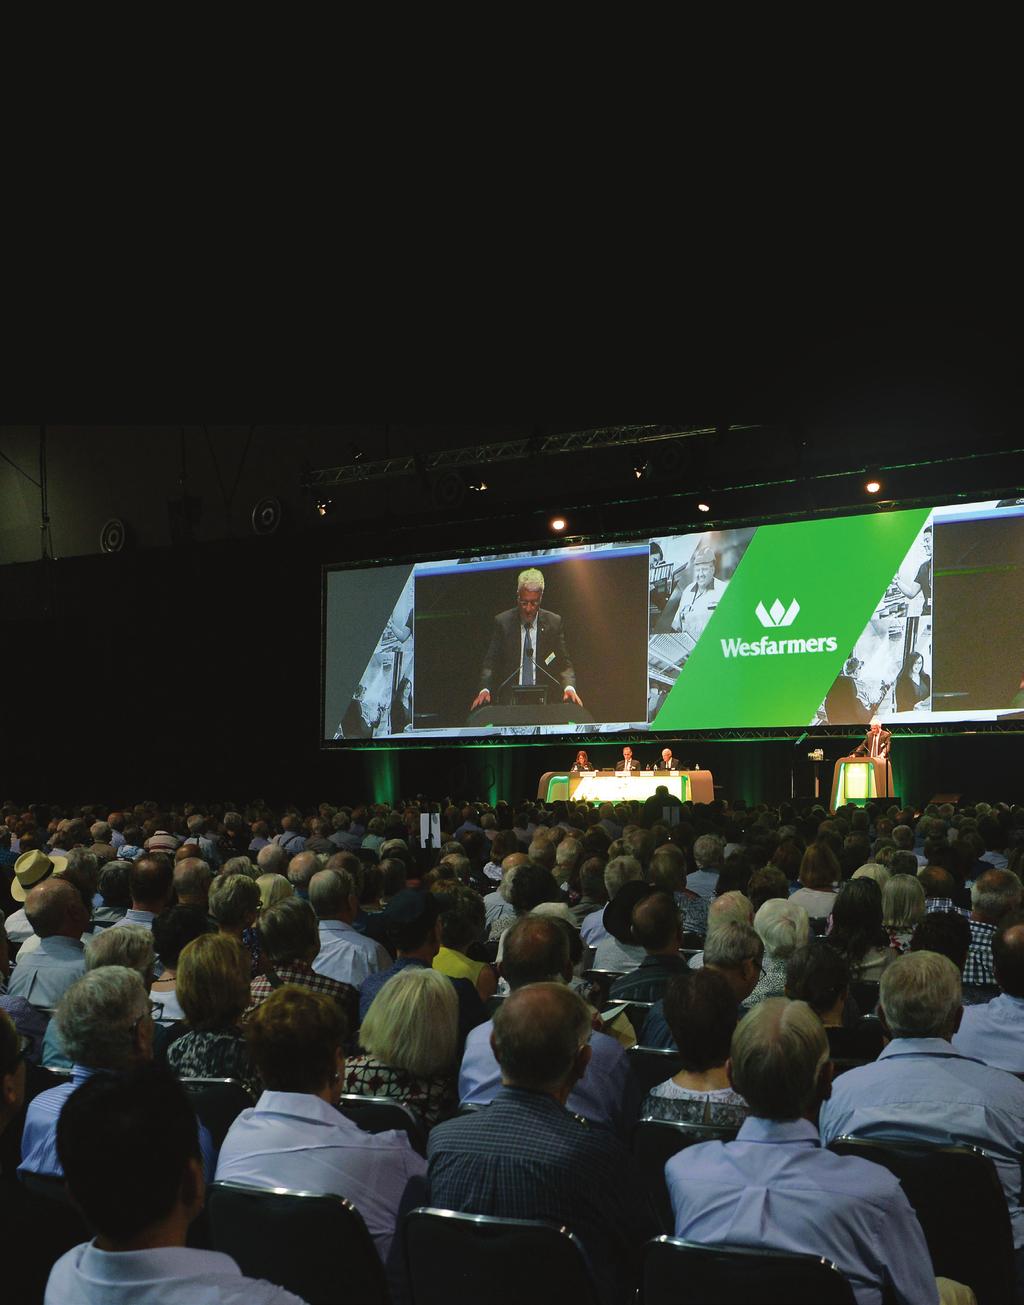 NOTICE OF MEETING 2018 Notice is given that the 37th Annual General Meeting of Wesfarmers Limited will be held at the Perth Convention and Exhibition Centre, Mounts Bay